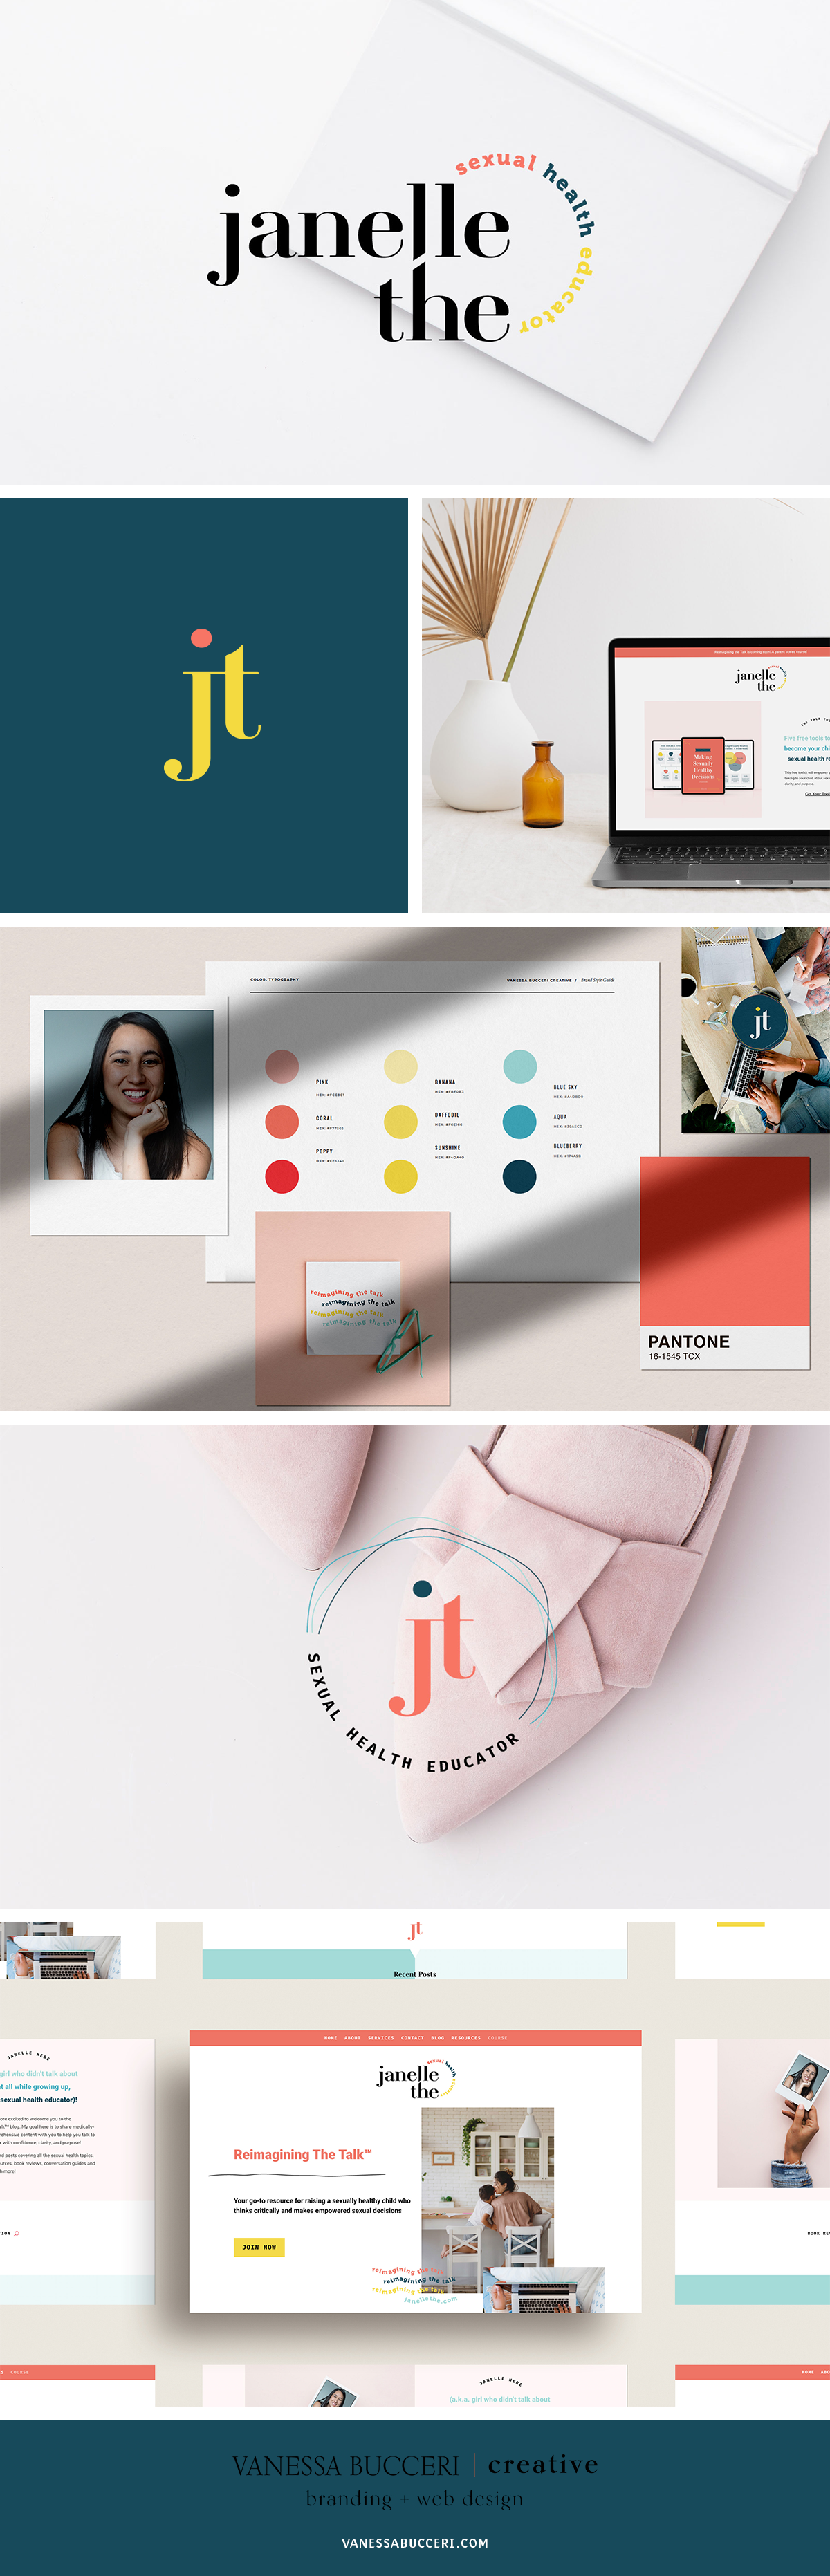 Personal branding and web design for educator Janelle The